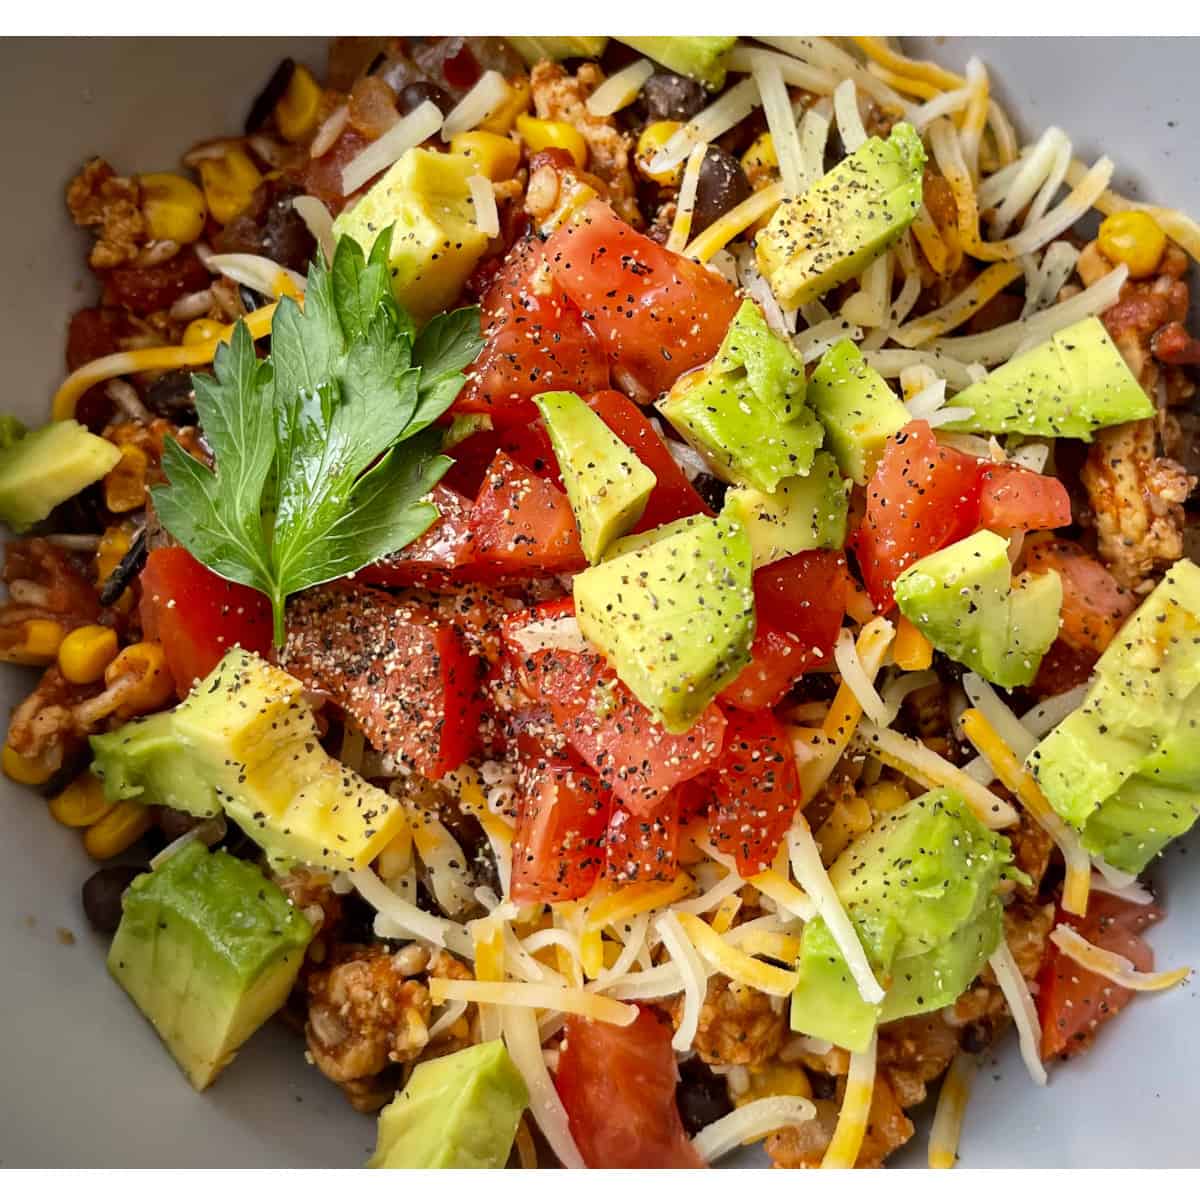 A prepared bowl of Healthy Cheesy Taco Skillet up close garnished with black pepper, tomato, avocado, cheese and a cilantro leaf